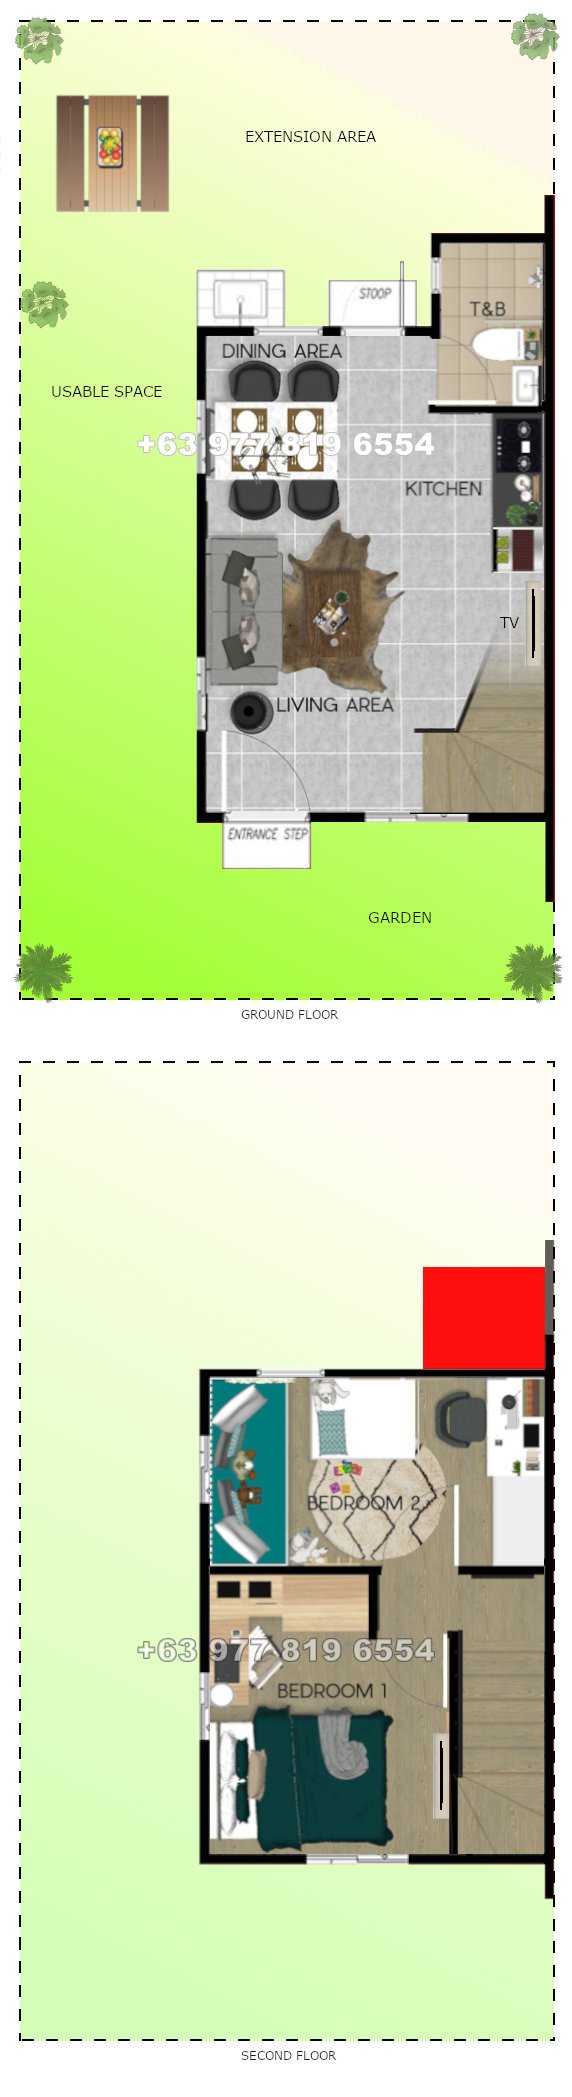 Ezabelle Floor Plan House and Lot in Cavite